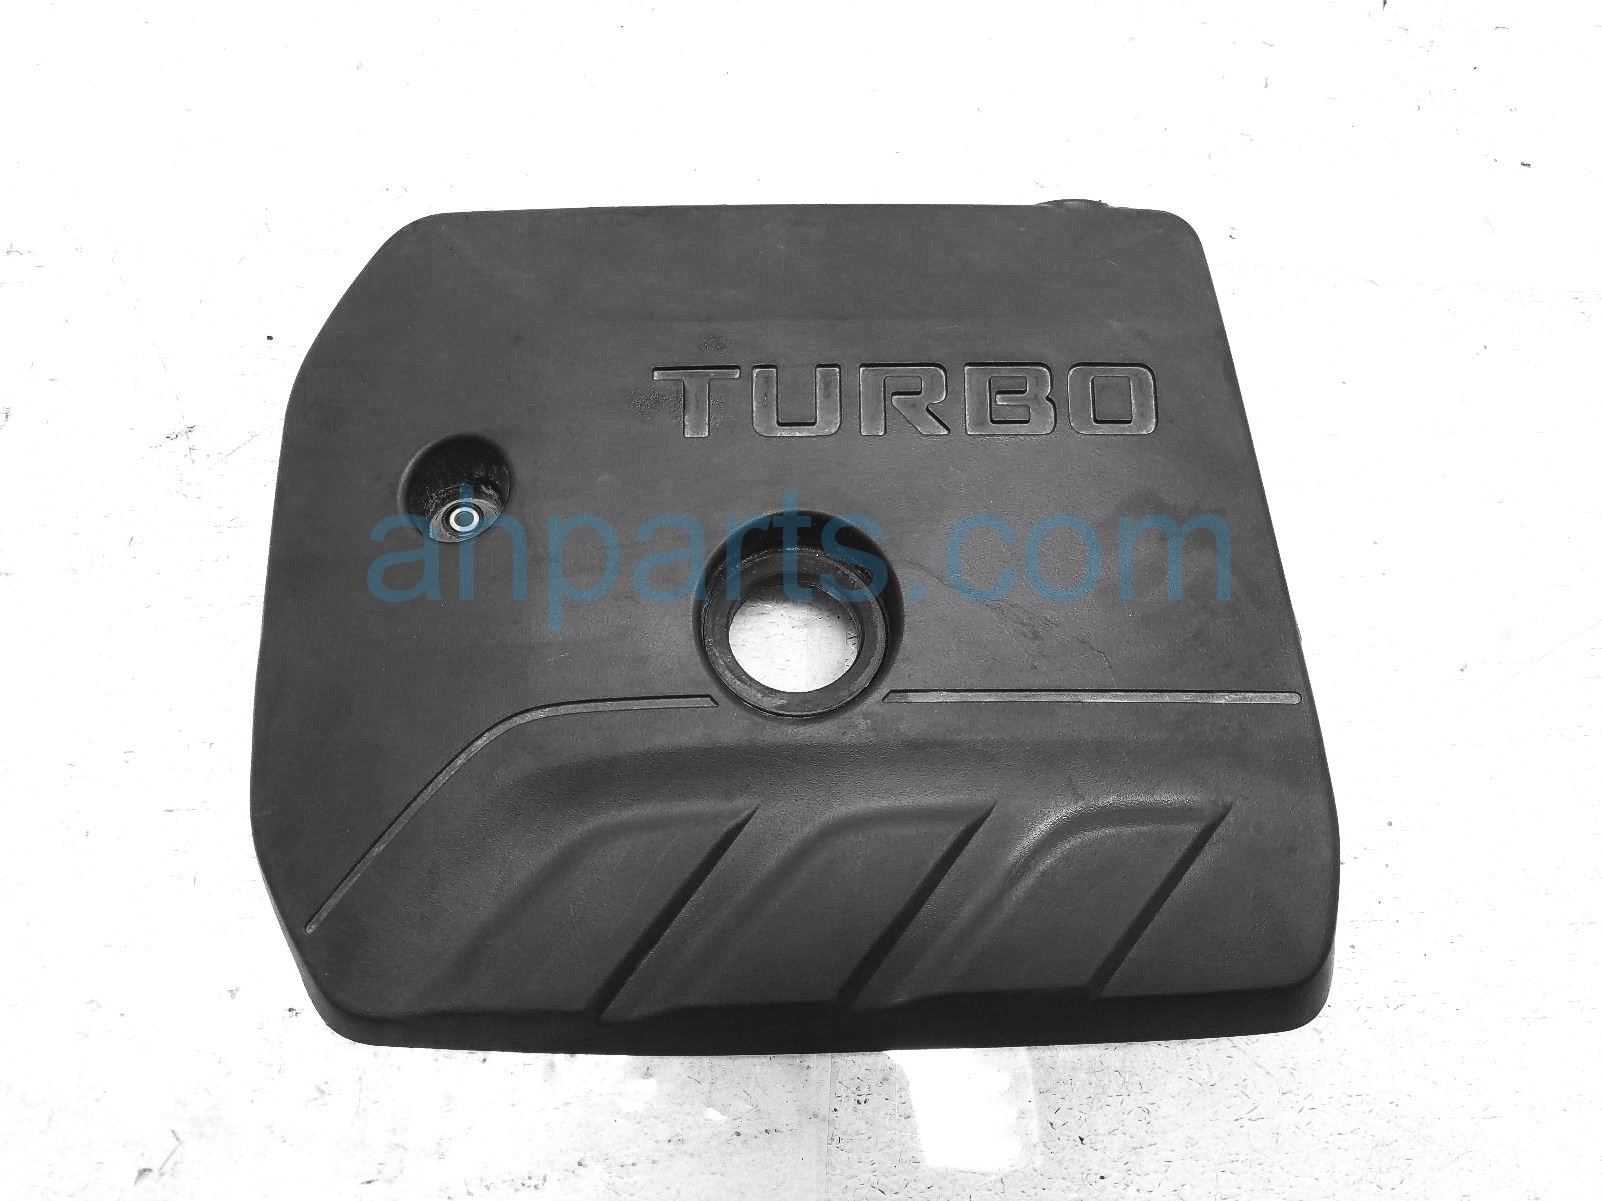 $30 Buick ENGINE APPEARANCE COVER